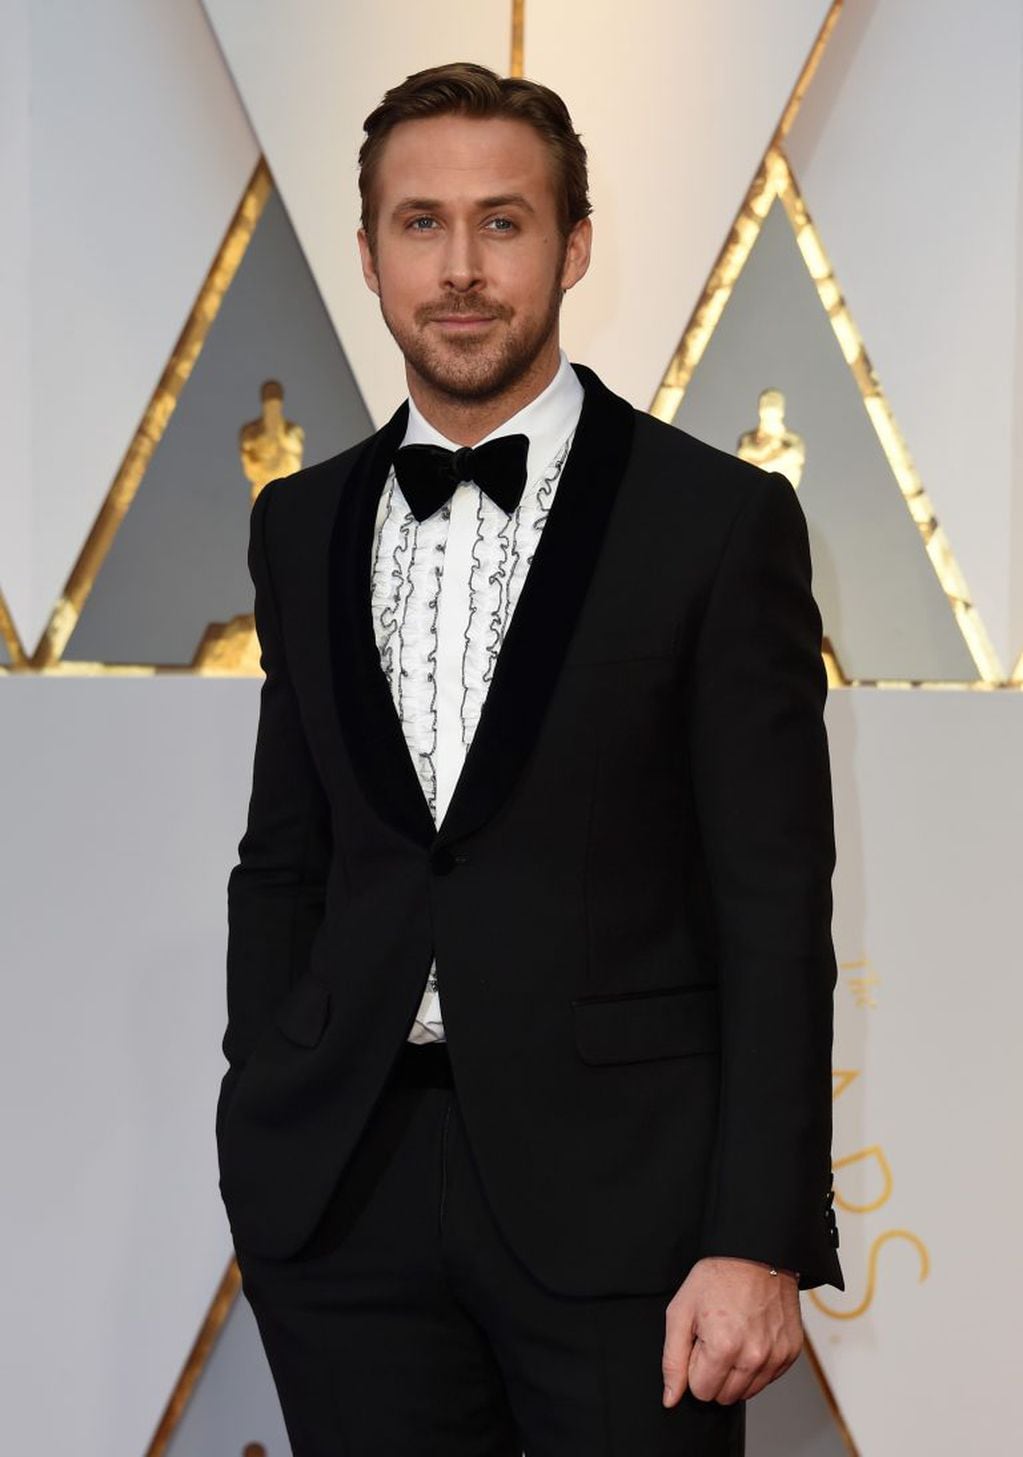 Nominee for Best Actor "La La Land" Ryan Gosling arrives on the red carpet for the 89th Oscars on February 26, 2017 in Hollywood, California.  / AFP PHOTO / VALERIE MACON